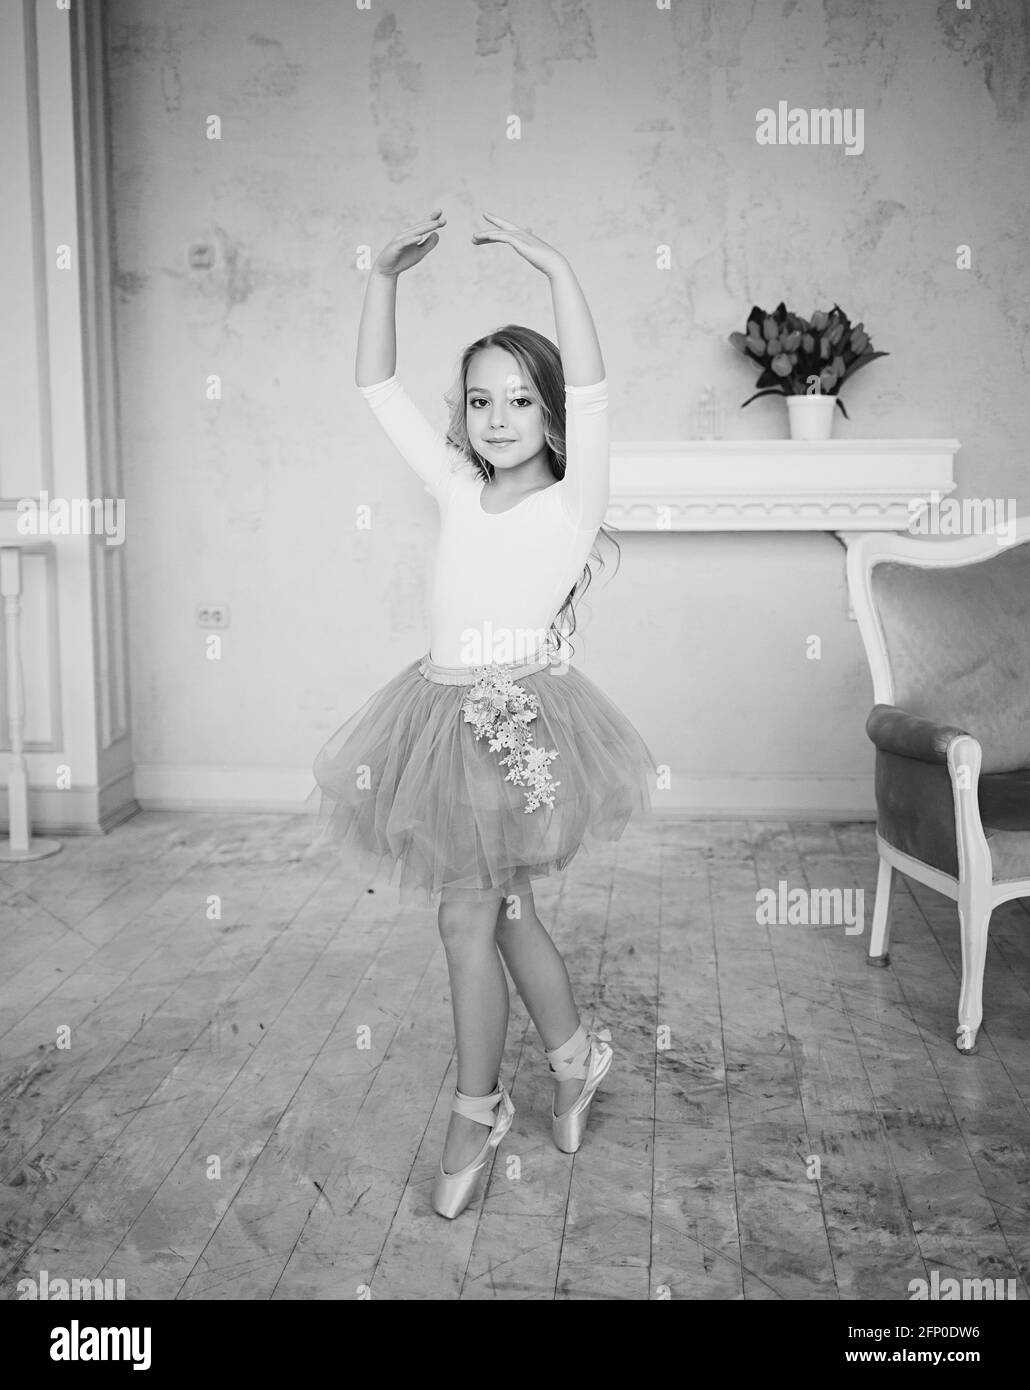 cute little ballerina girl dancing looking at the camera Stock Photo